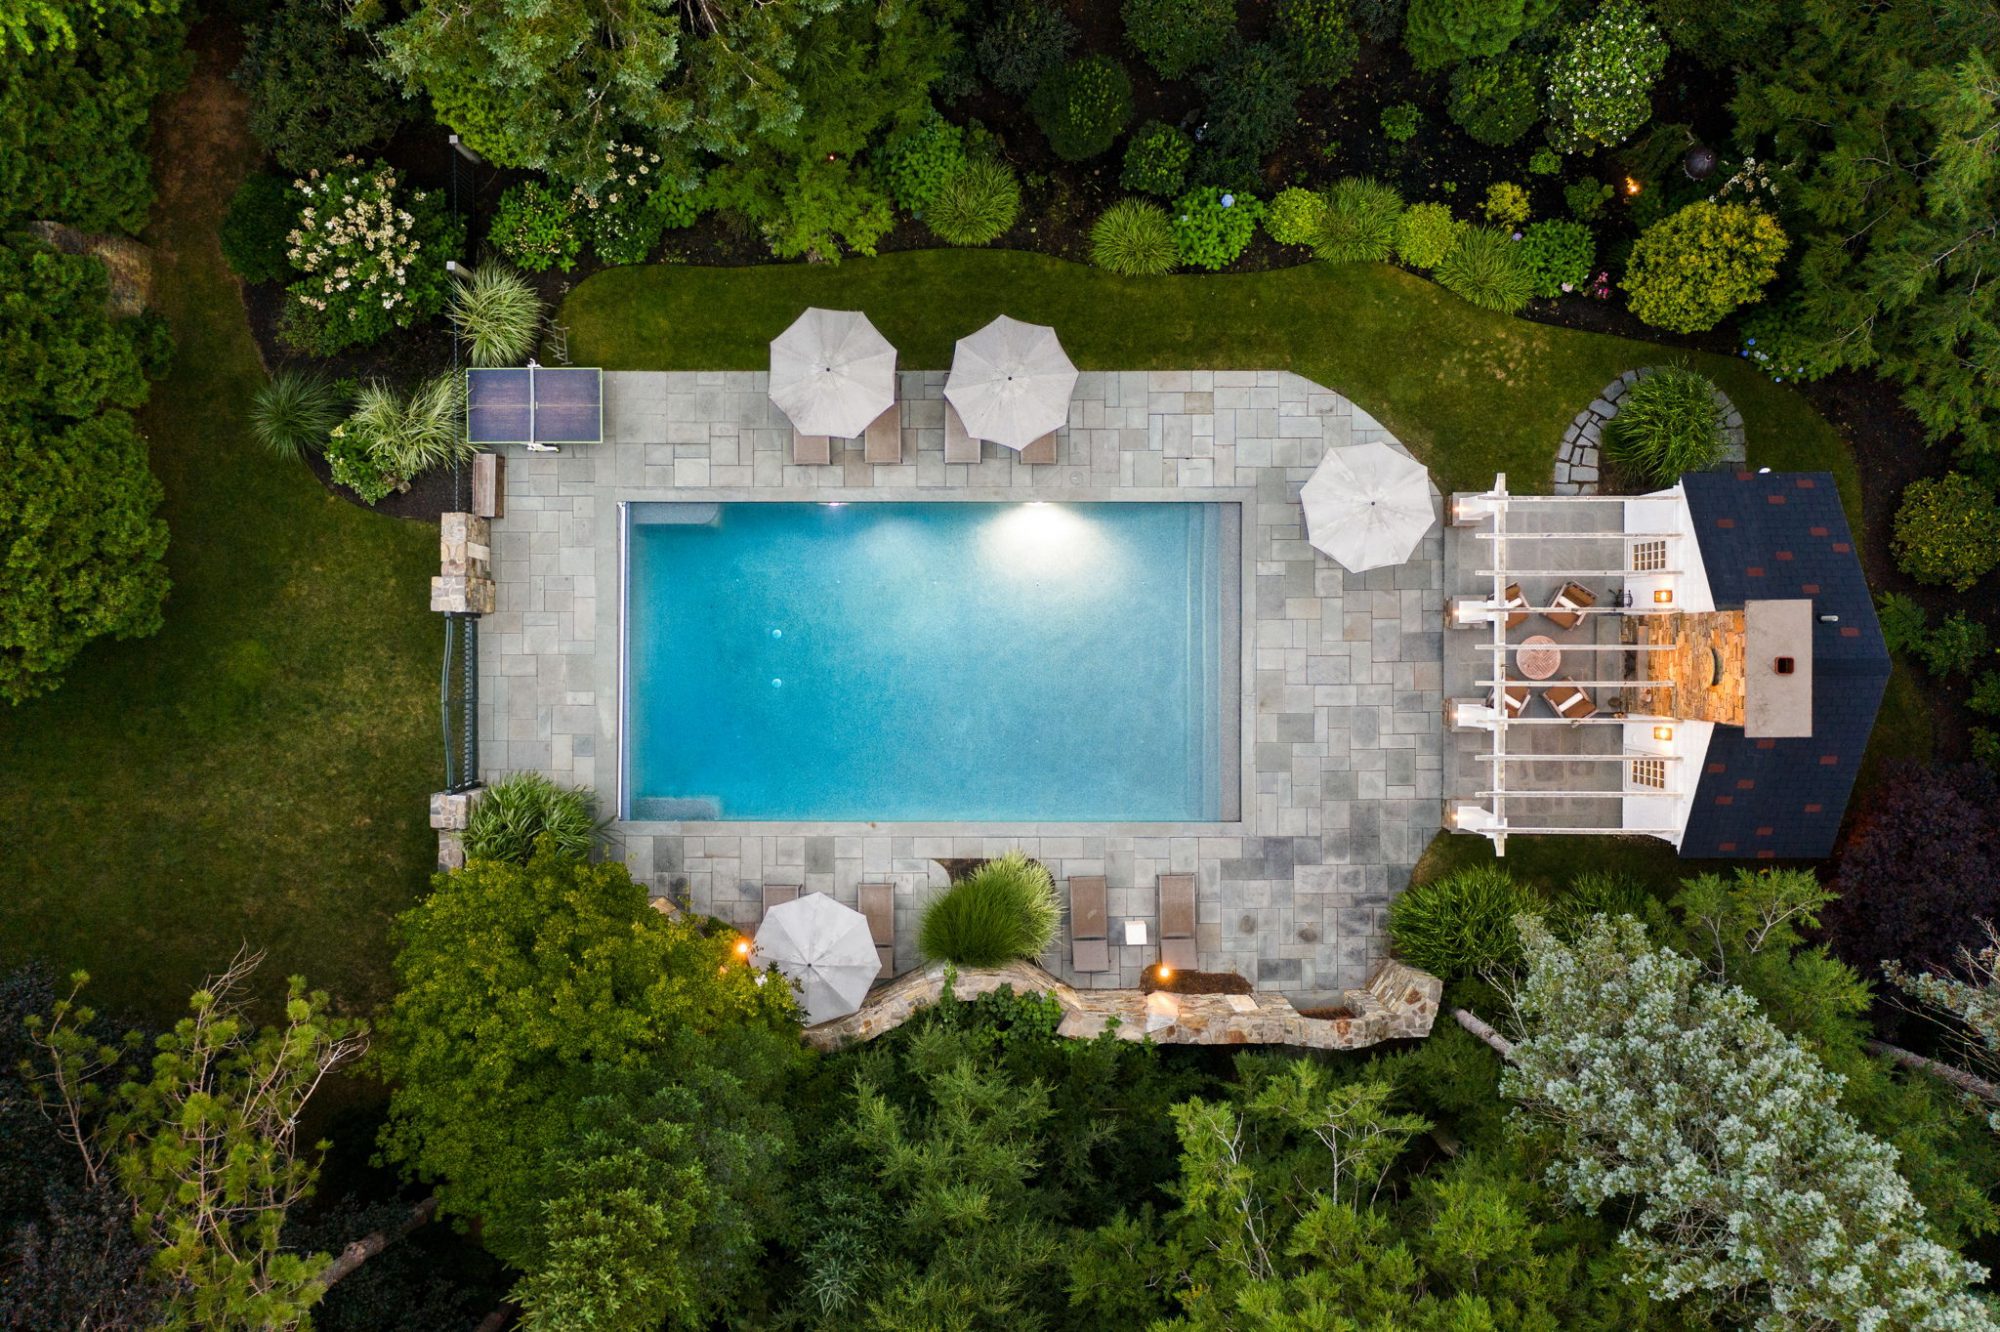 Aerial Real Estate Photo of a Pool and Backyard